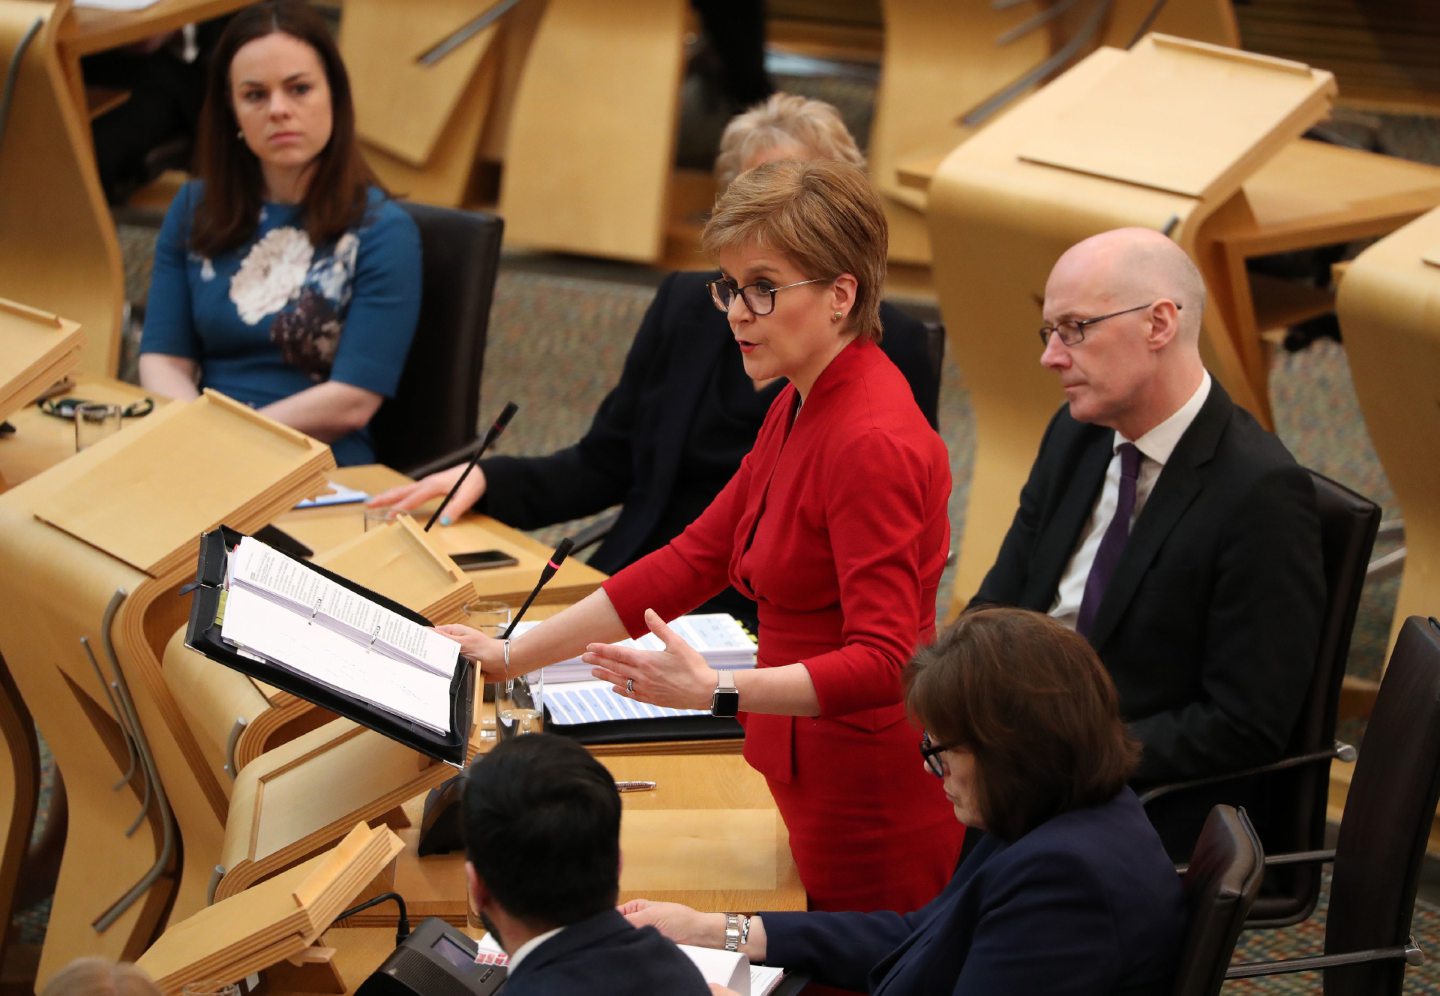 First Minister Nicola Sturgeon in the debating chamber during FMQs.